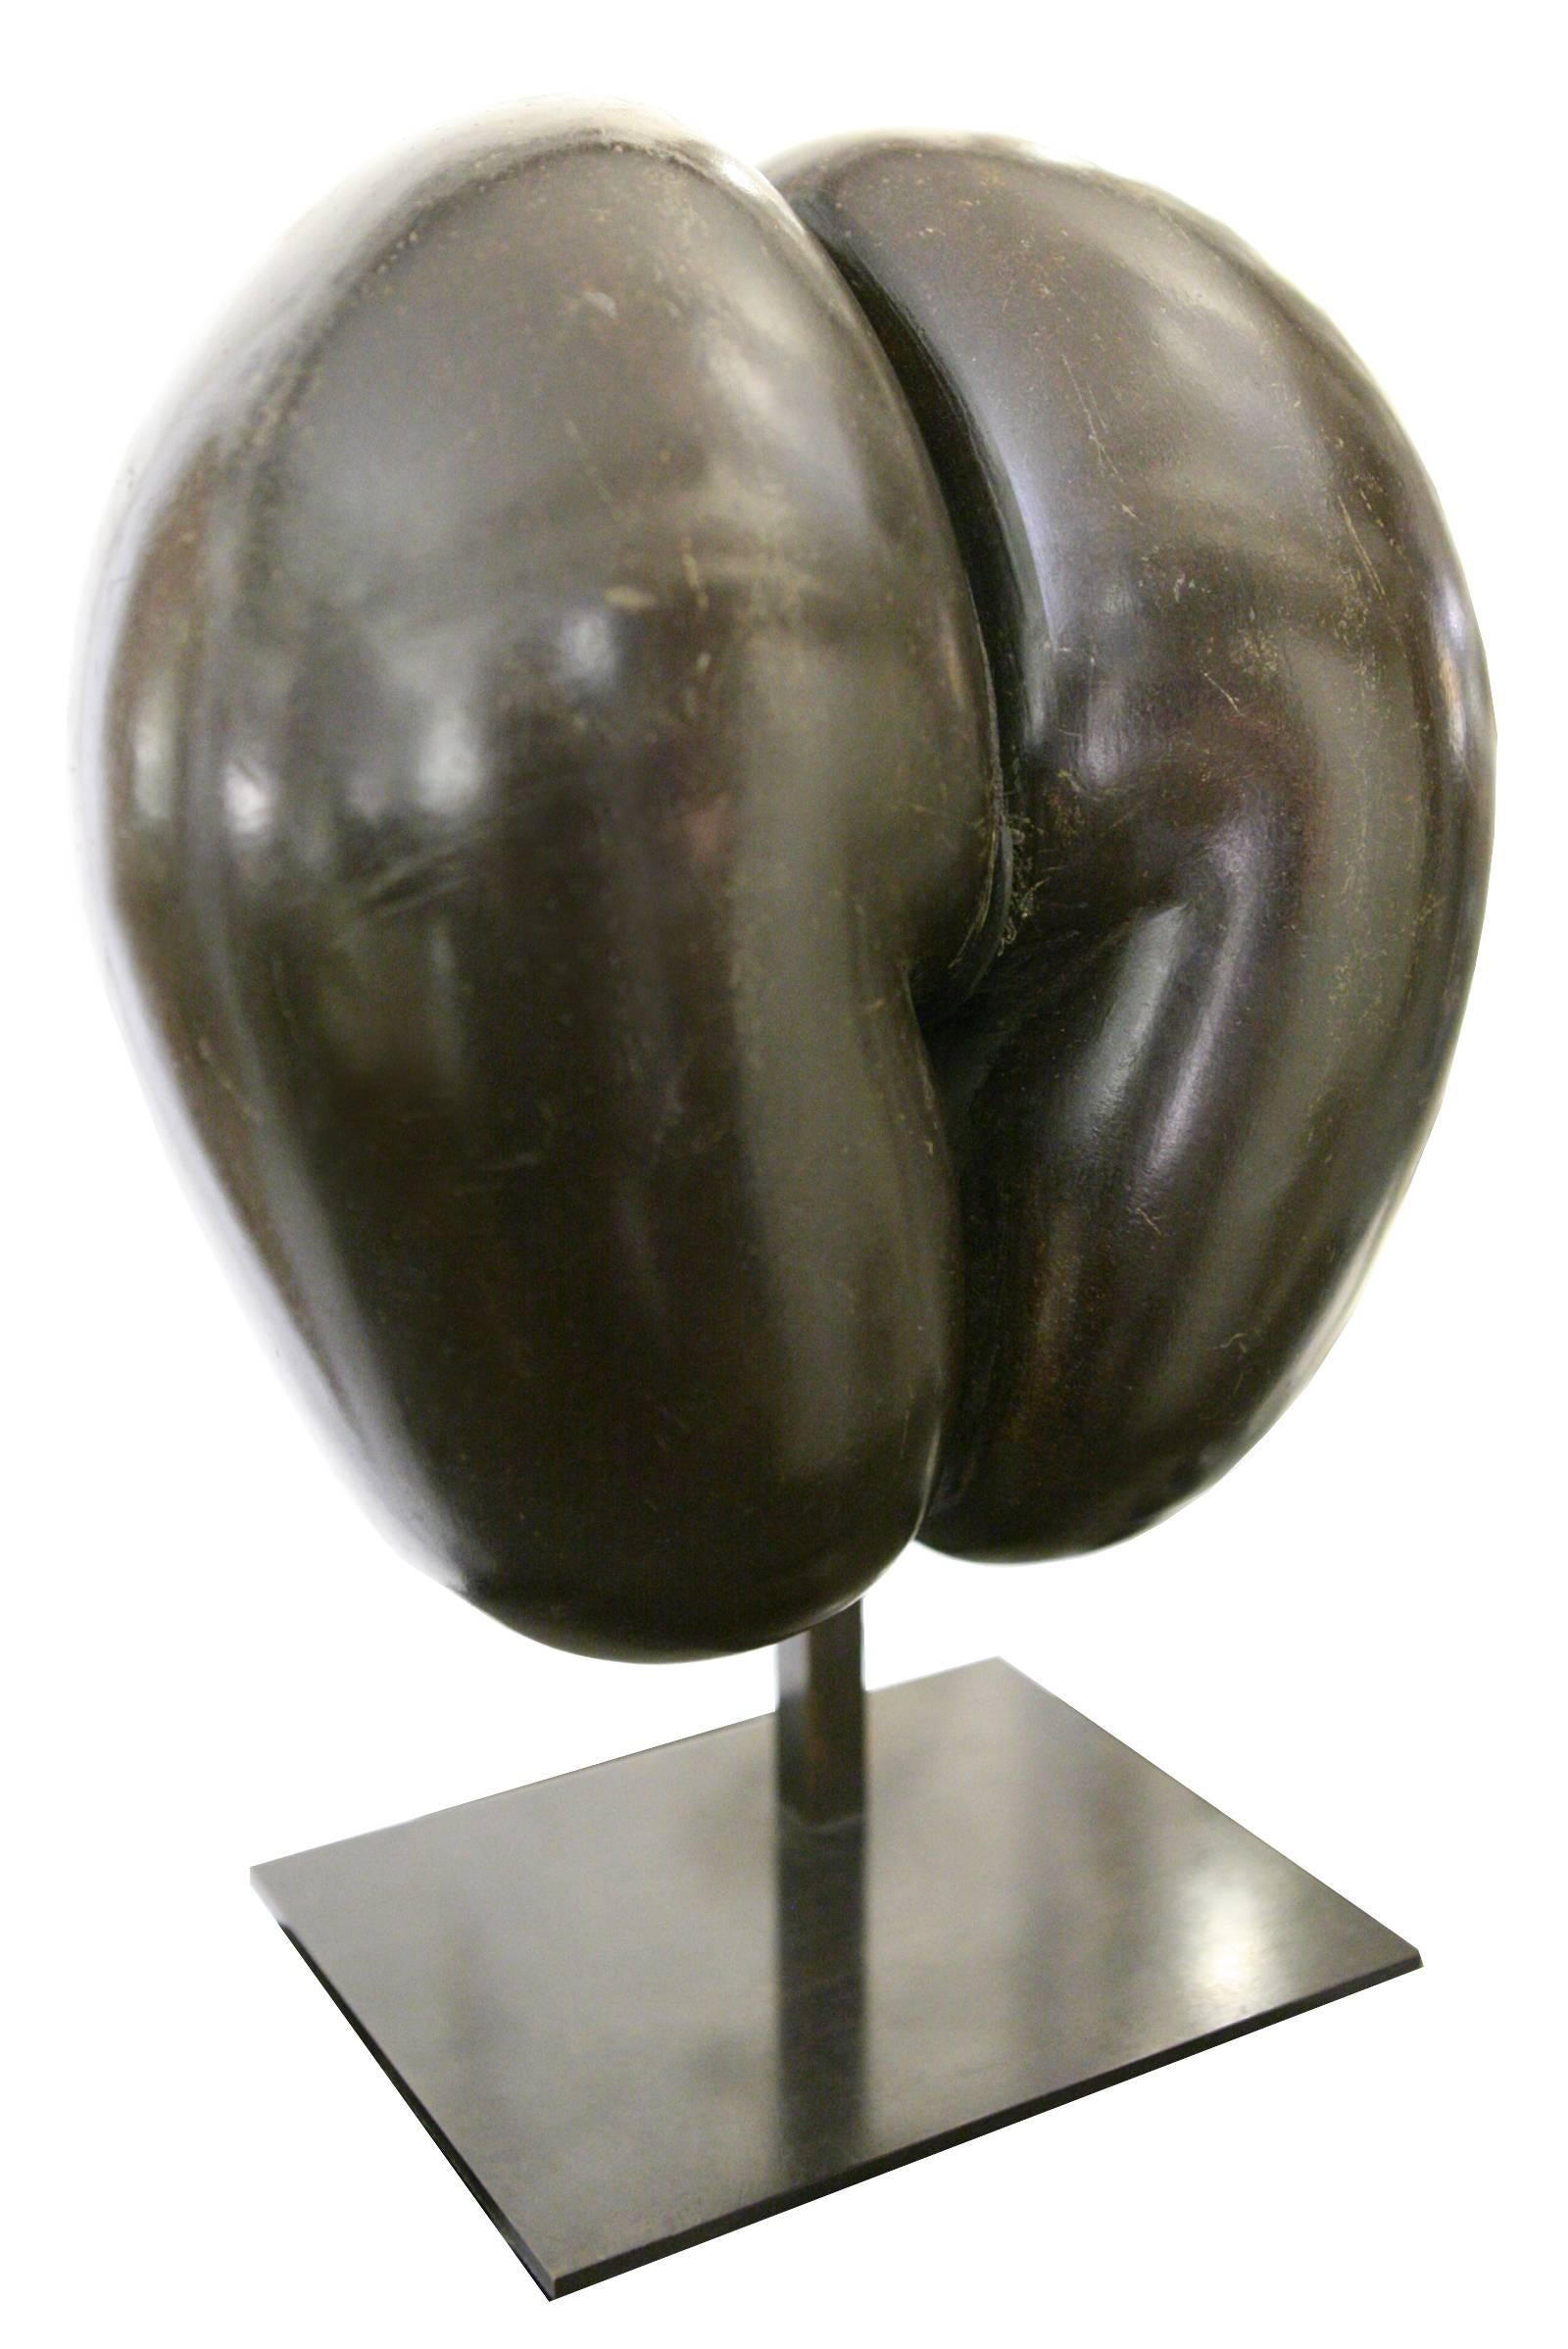 Real coconut from Praslin, Seychelles.
On bronze base. Rare piece.
